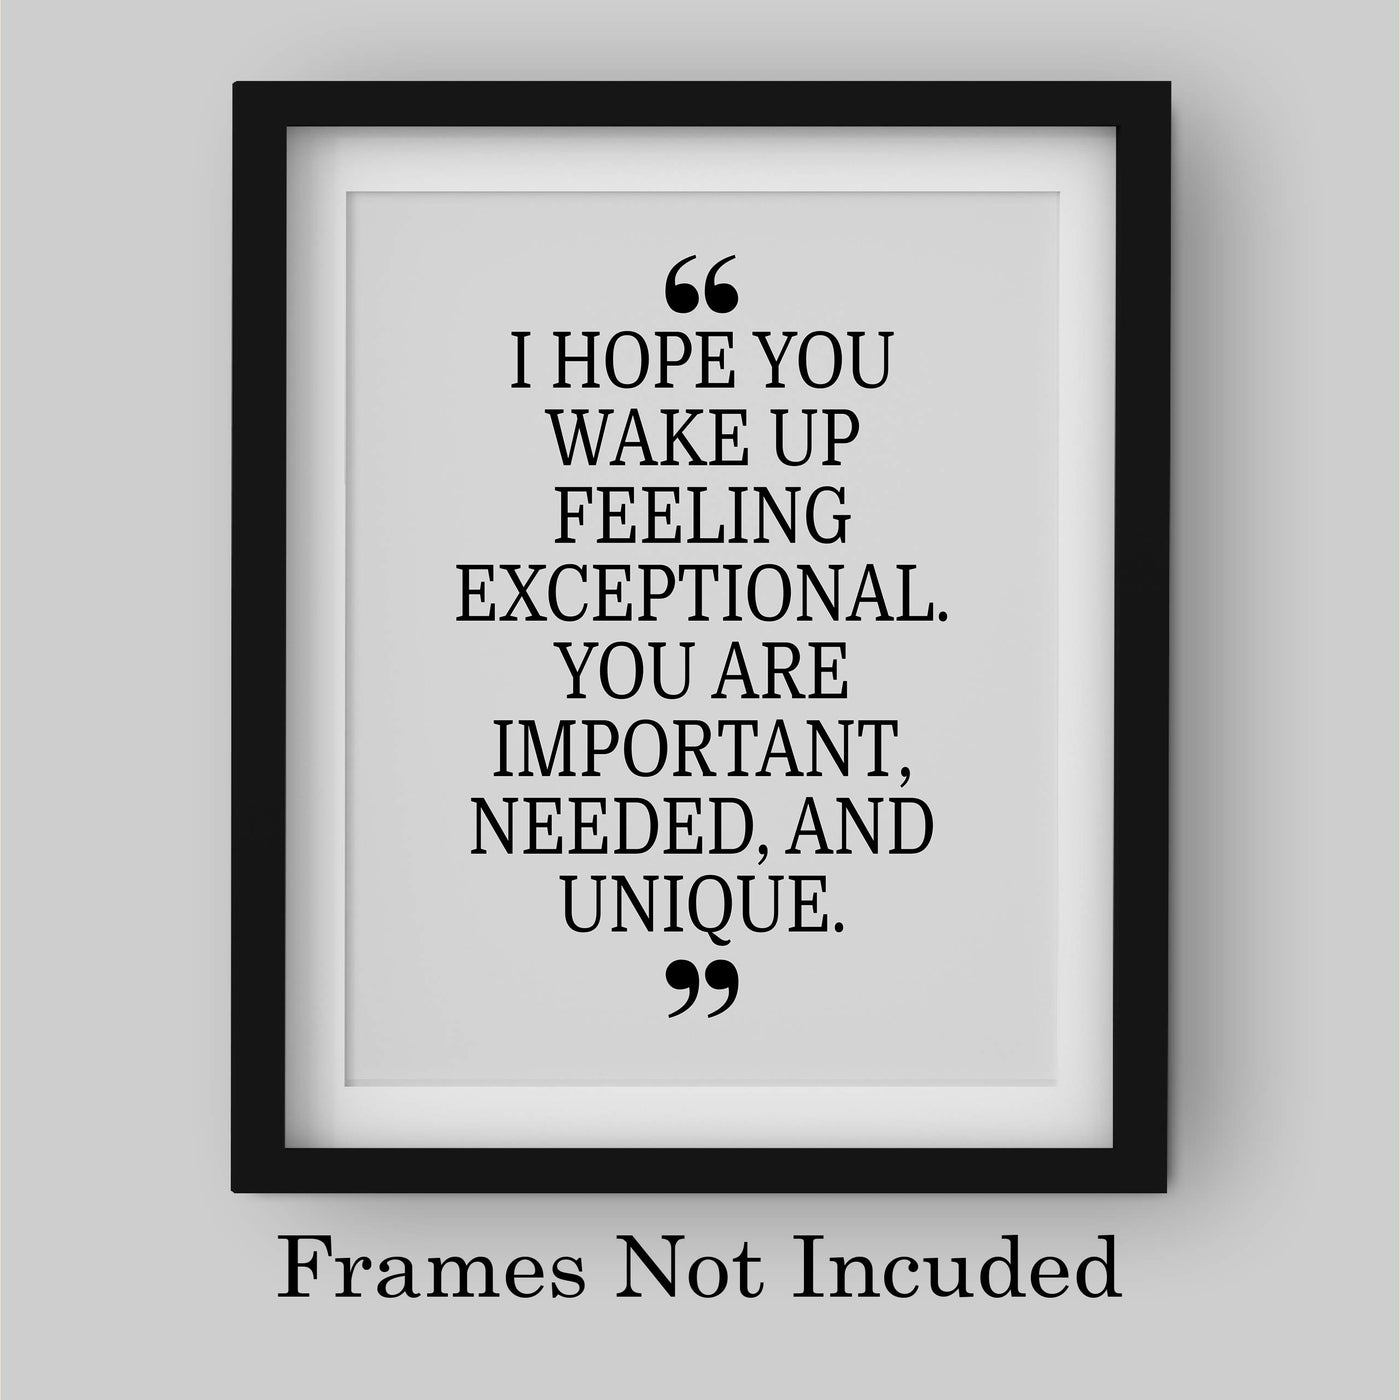 You Are Important, Needed, and Unique Motivational Quotes Wall Art -8 x 10" Inspirational Poster Print-Ready to Frame. Modern Typographic Design. Positive Home-Office-Classroom-Dorm Decor!